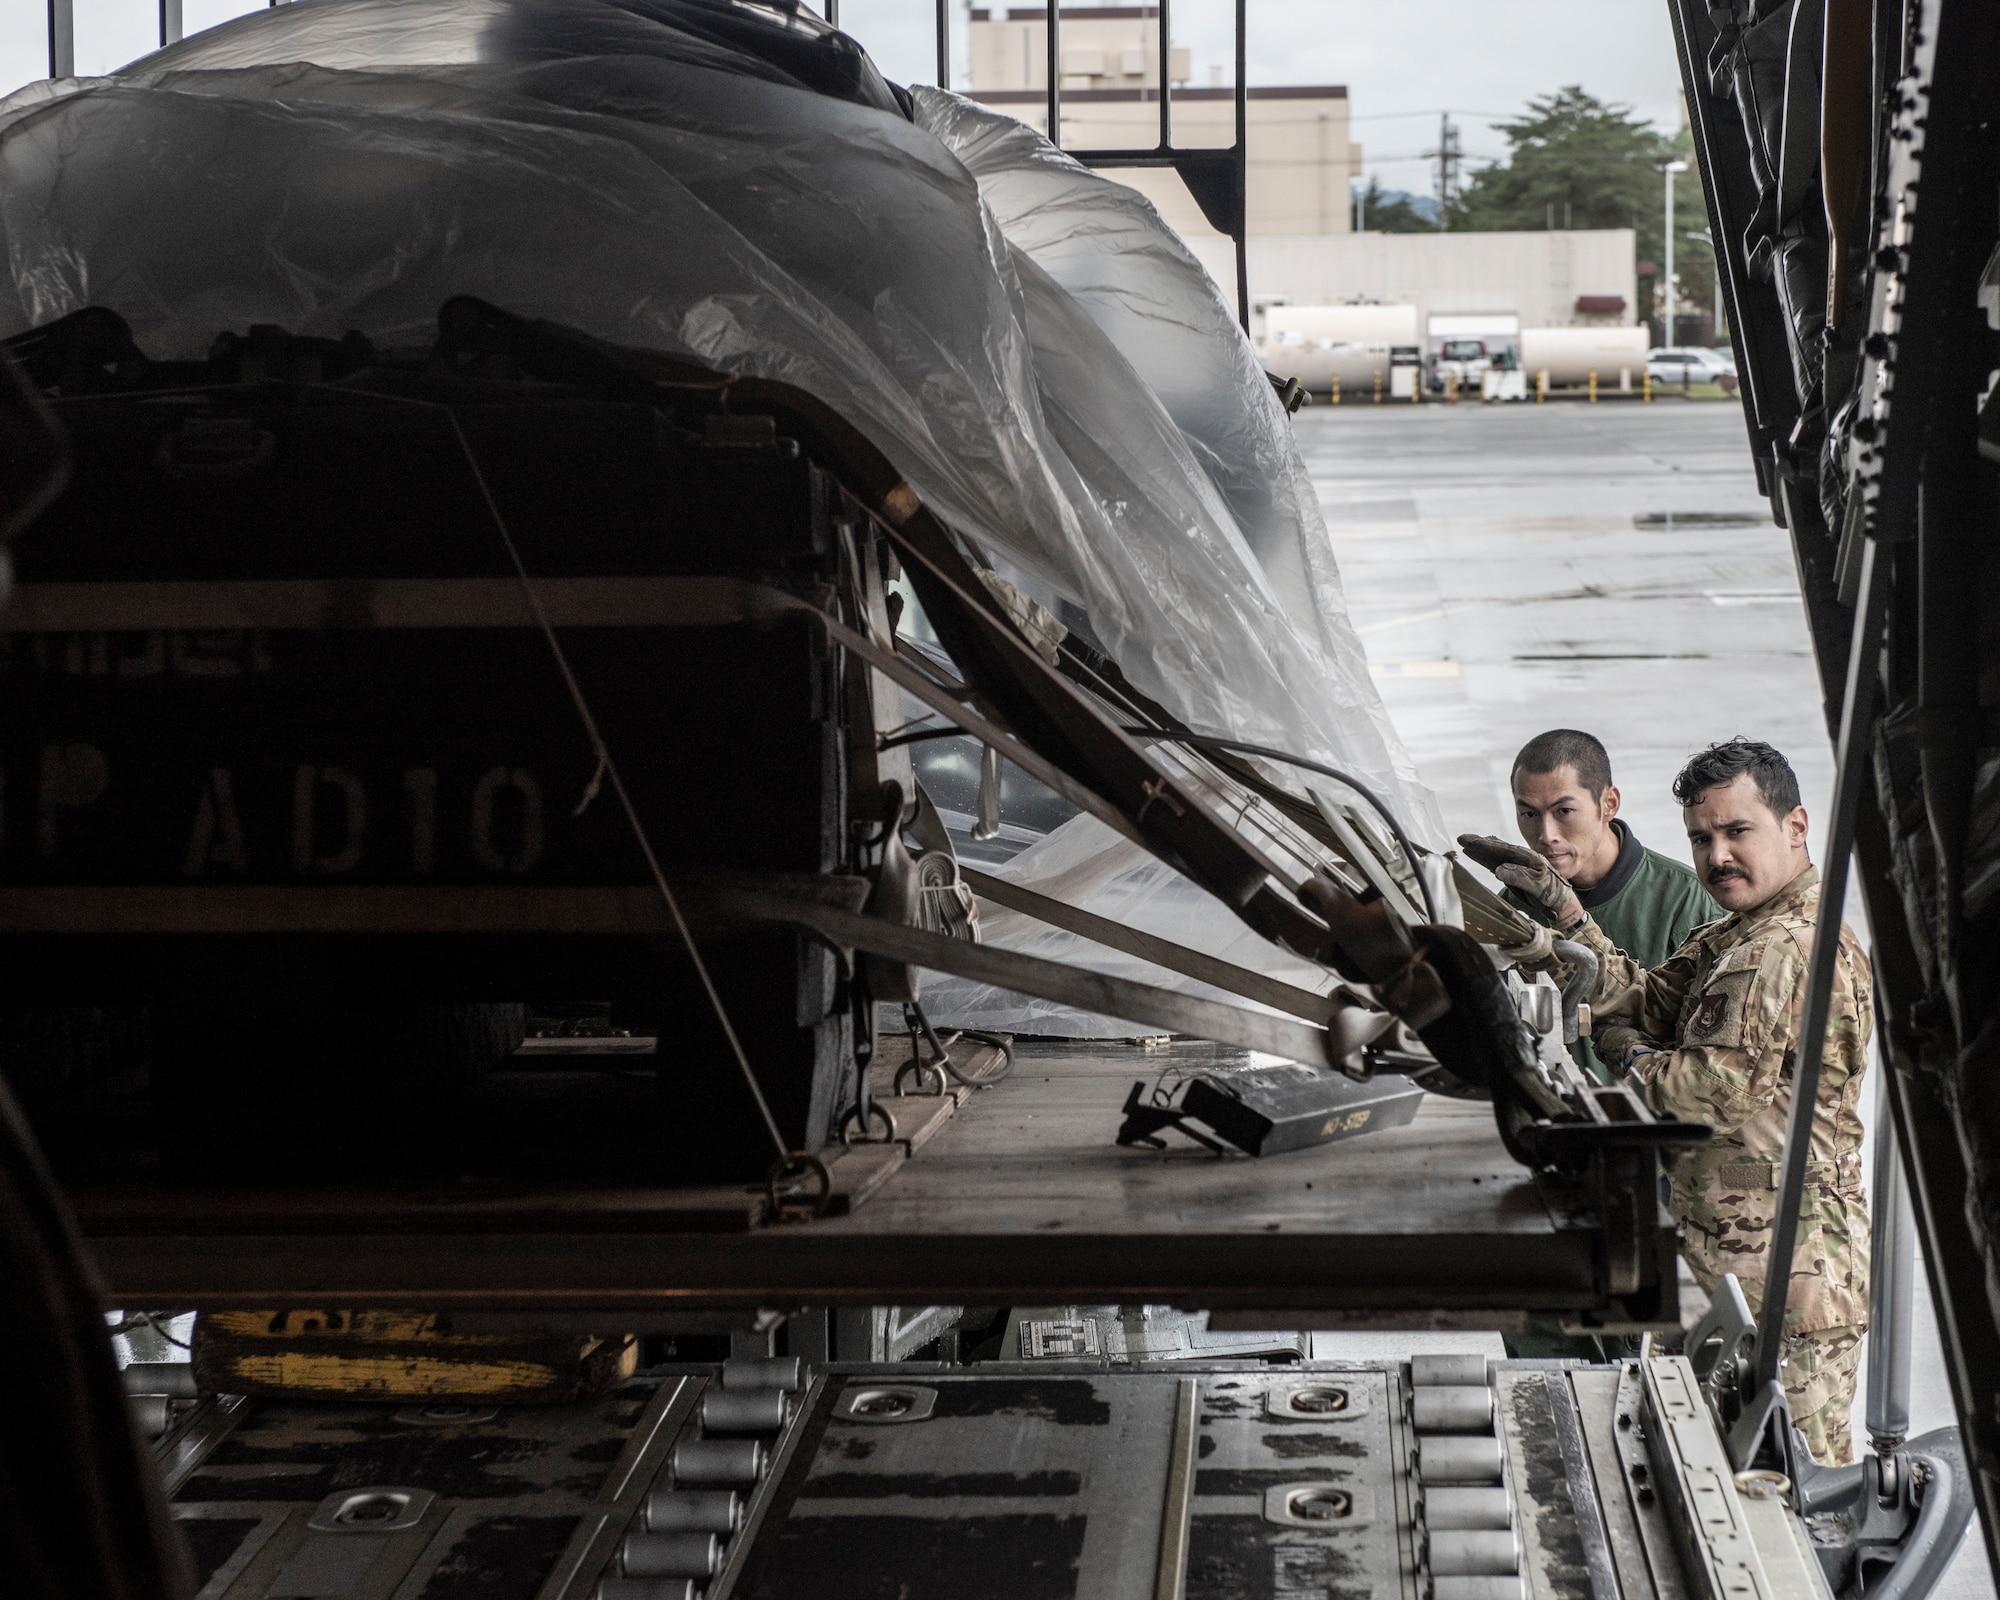 Staff Sgt. Hector Frietze, 36th Airlift Squadron loadmaster, marshals a forklift into a C-130J Super Hercules during a Bilateral Exchange Program, Oct. 22, 2019, at Yokota Air Base, Japan.